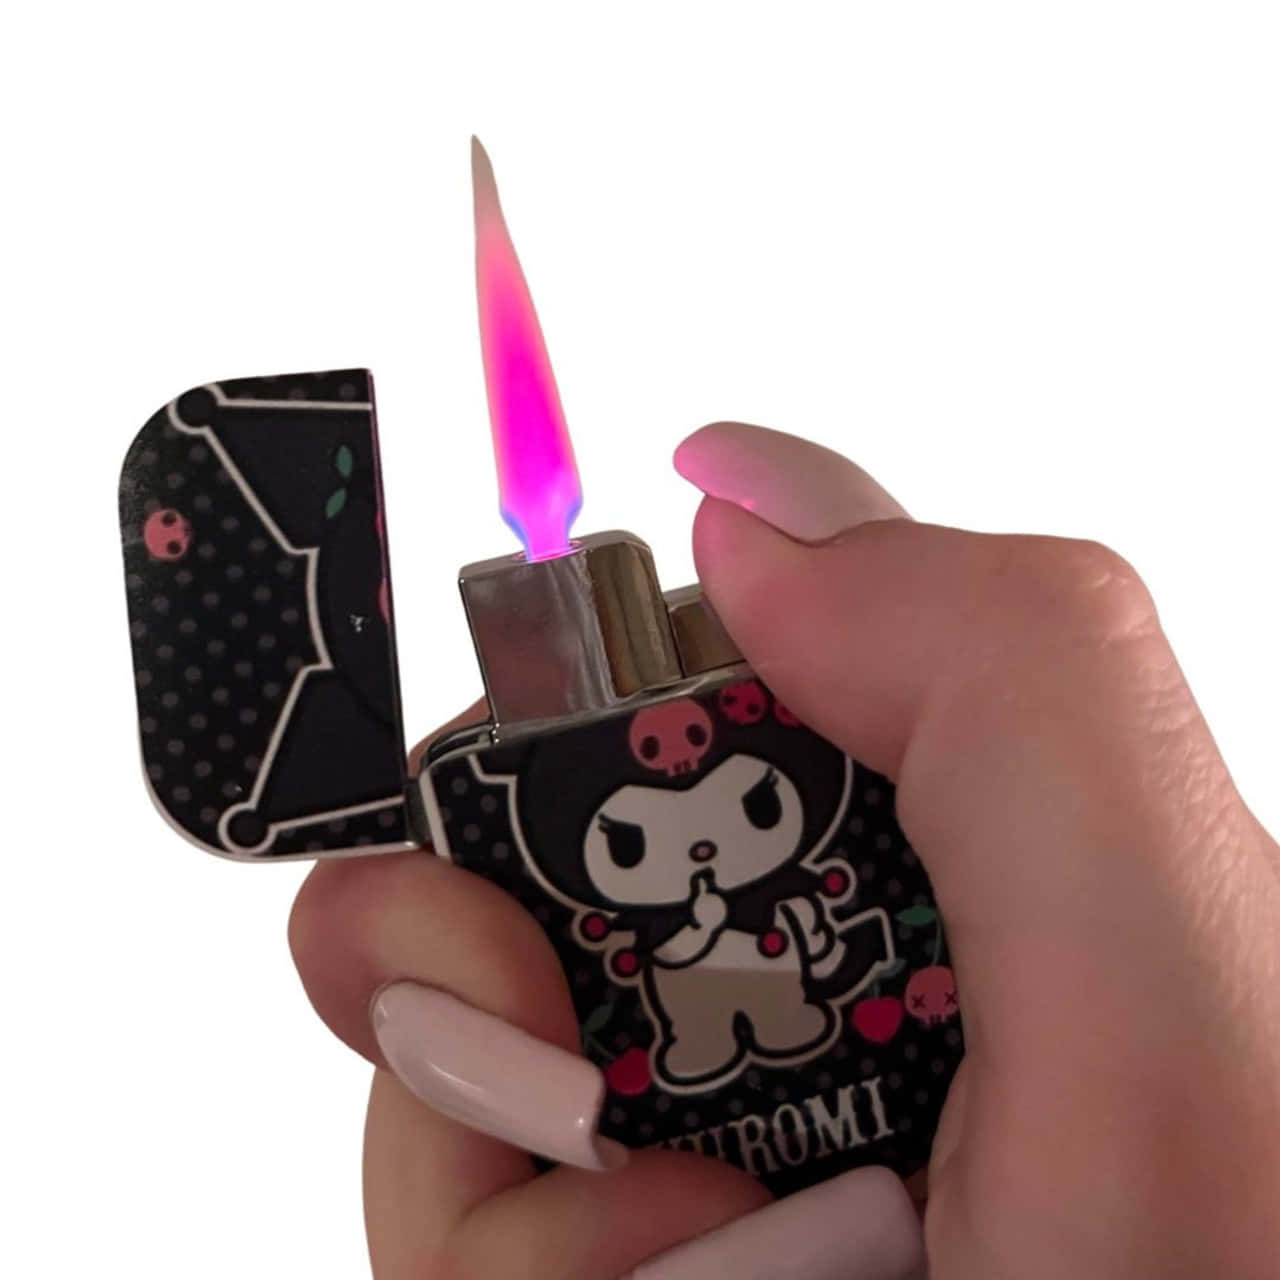 A Person Holding A Lighter With A Pink Kawaii Design